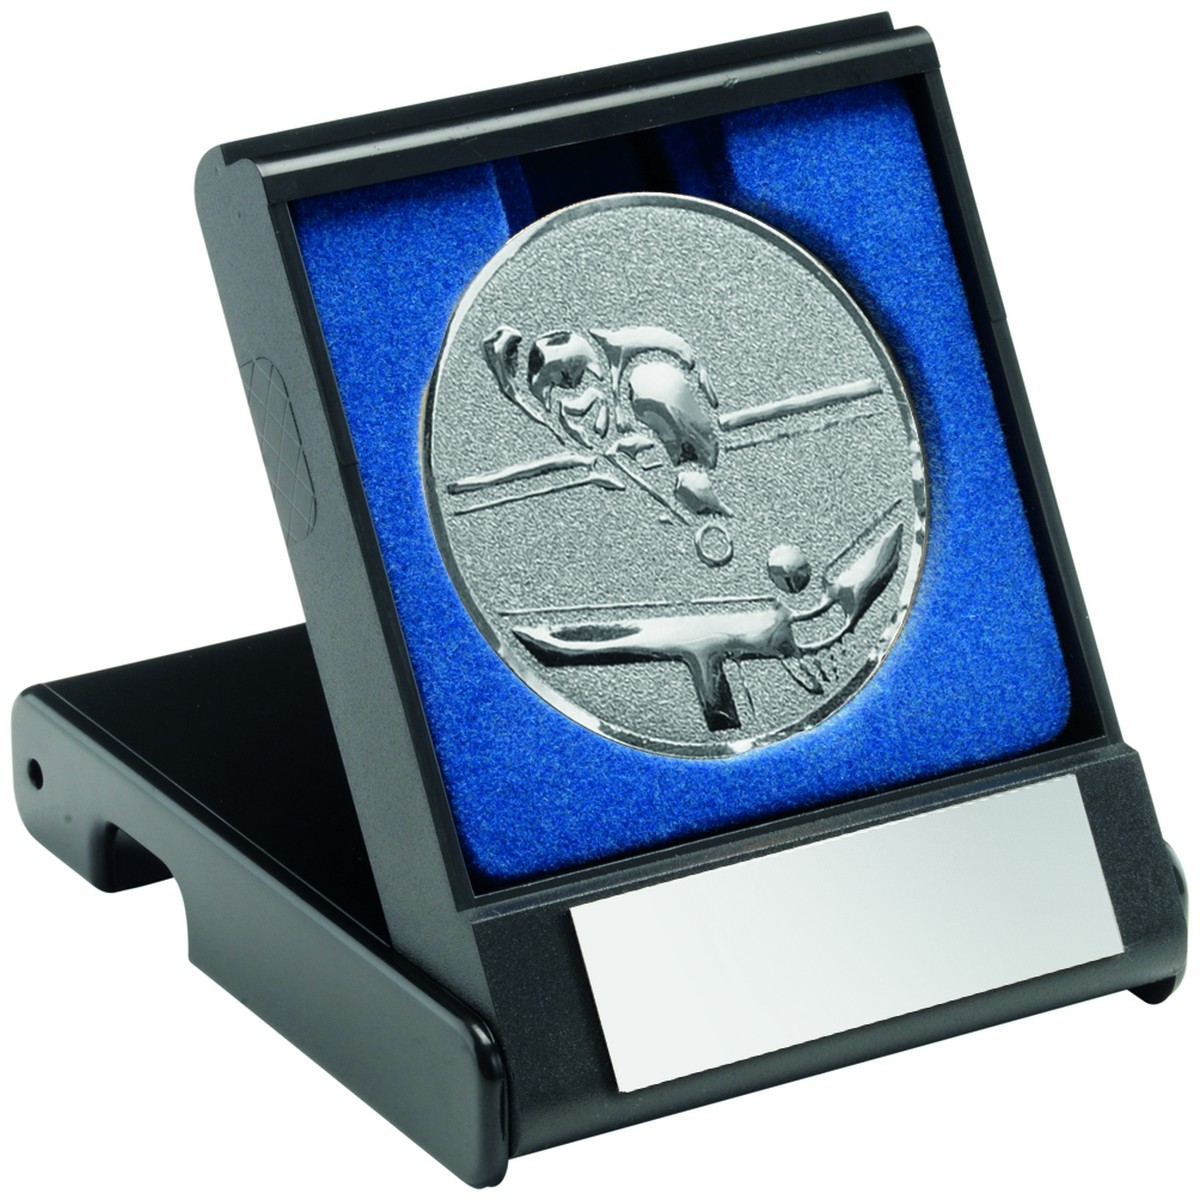 Black Plastic Medal Box With Pool/Snooker Insert